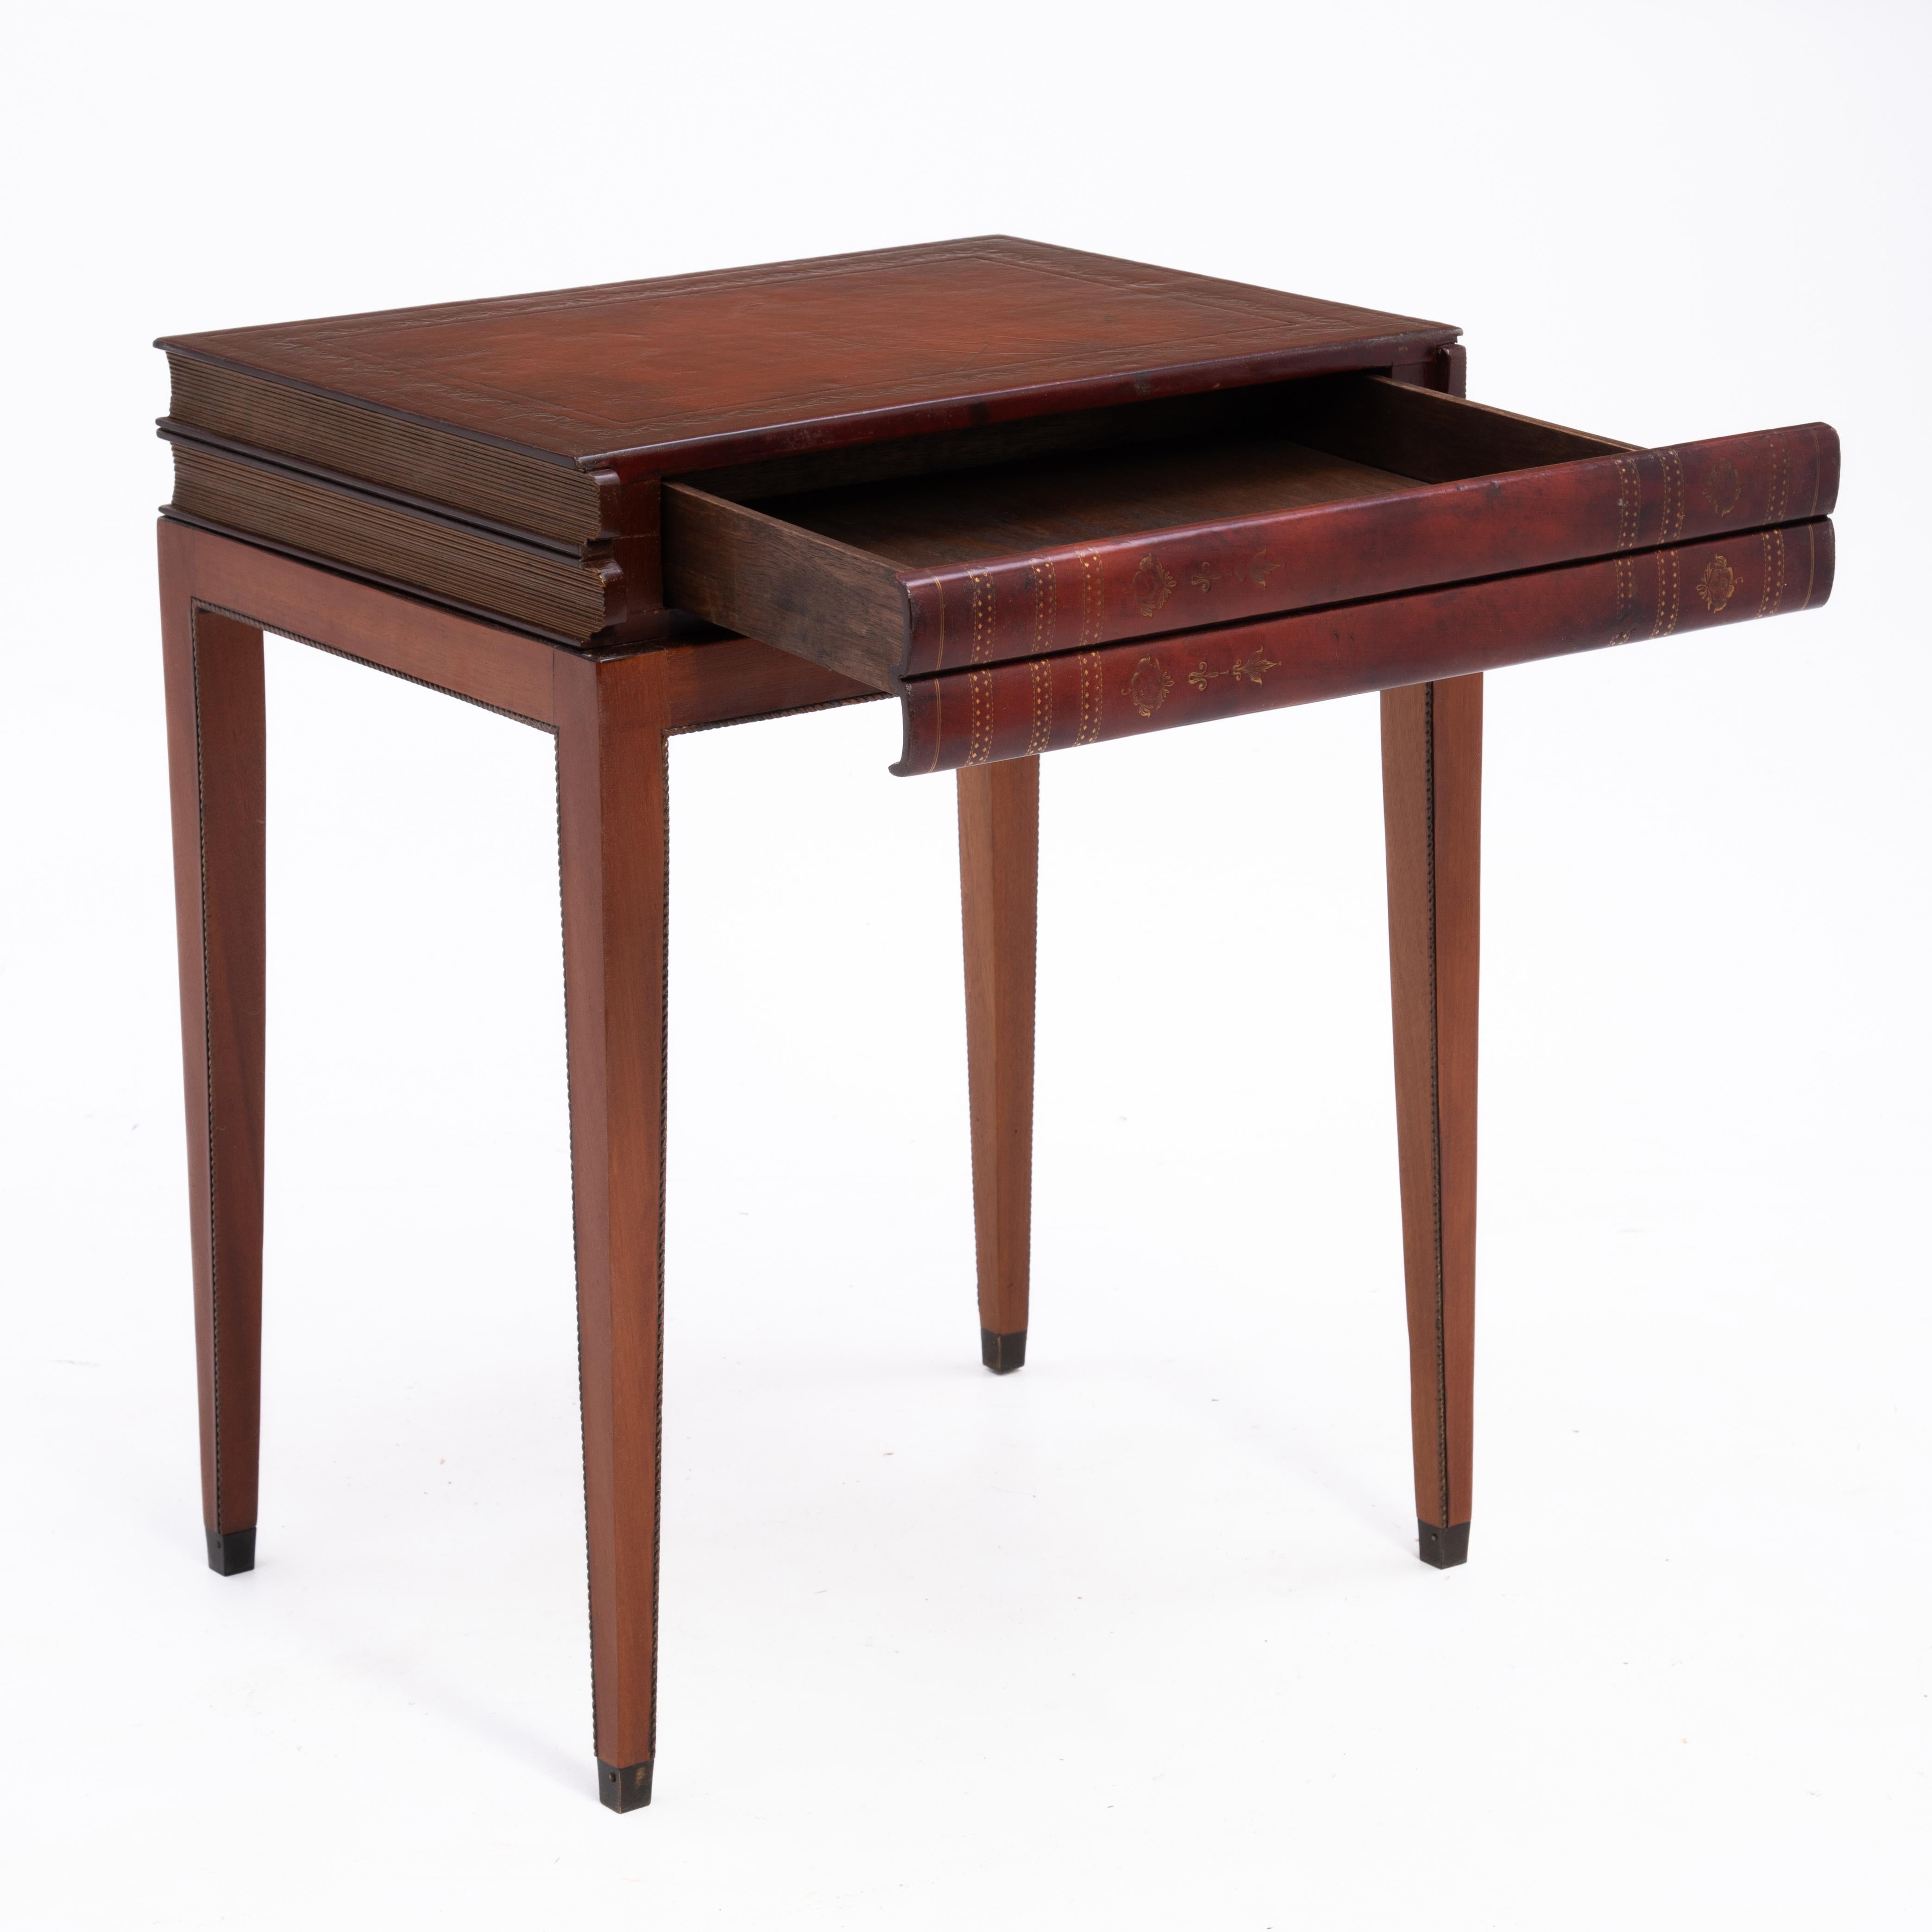 A graceful Trompe L'oeil embossed leather and mahogany book table with a single drawer table.  The delicate tapered legs end with brass capped feet There is also a carved rope detail on two sides of each leg and the bottom of the case that frames